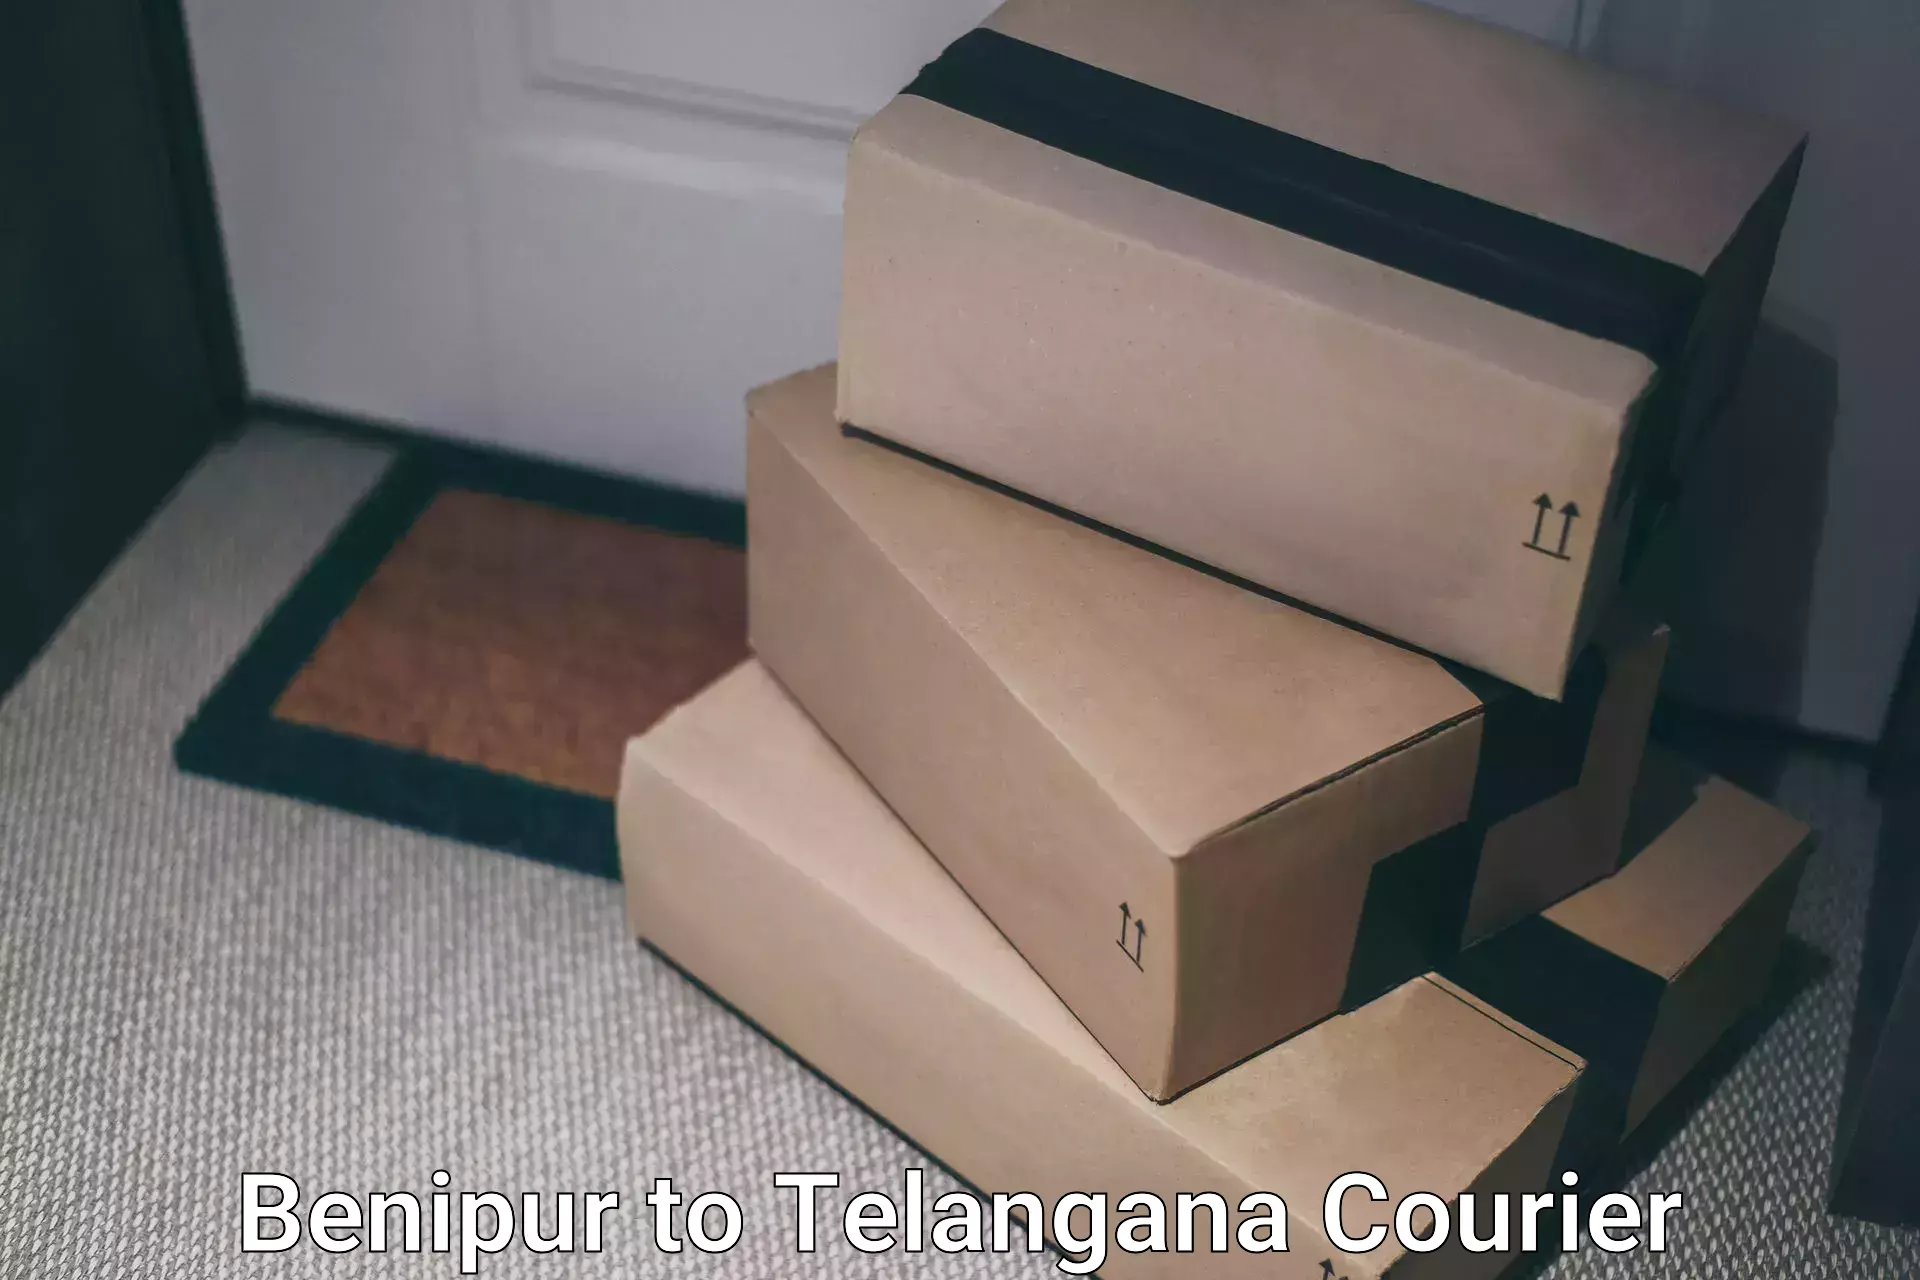 24/7 courier service Benipur to Telangana